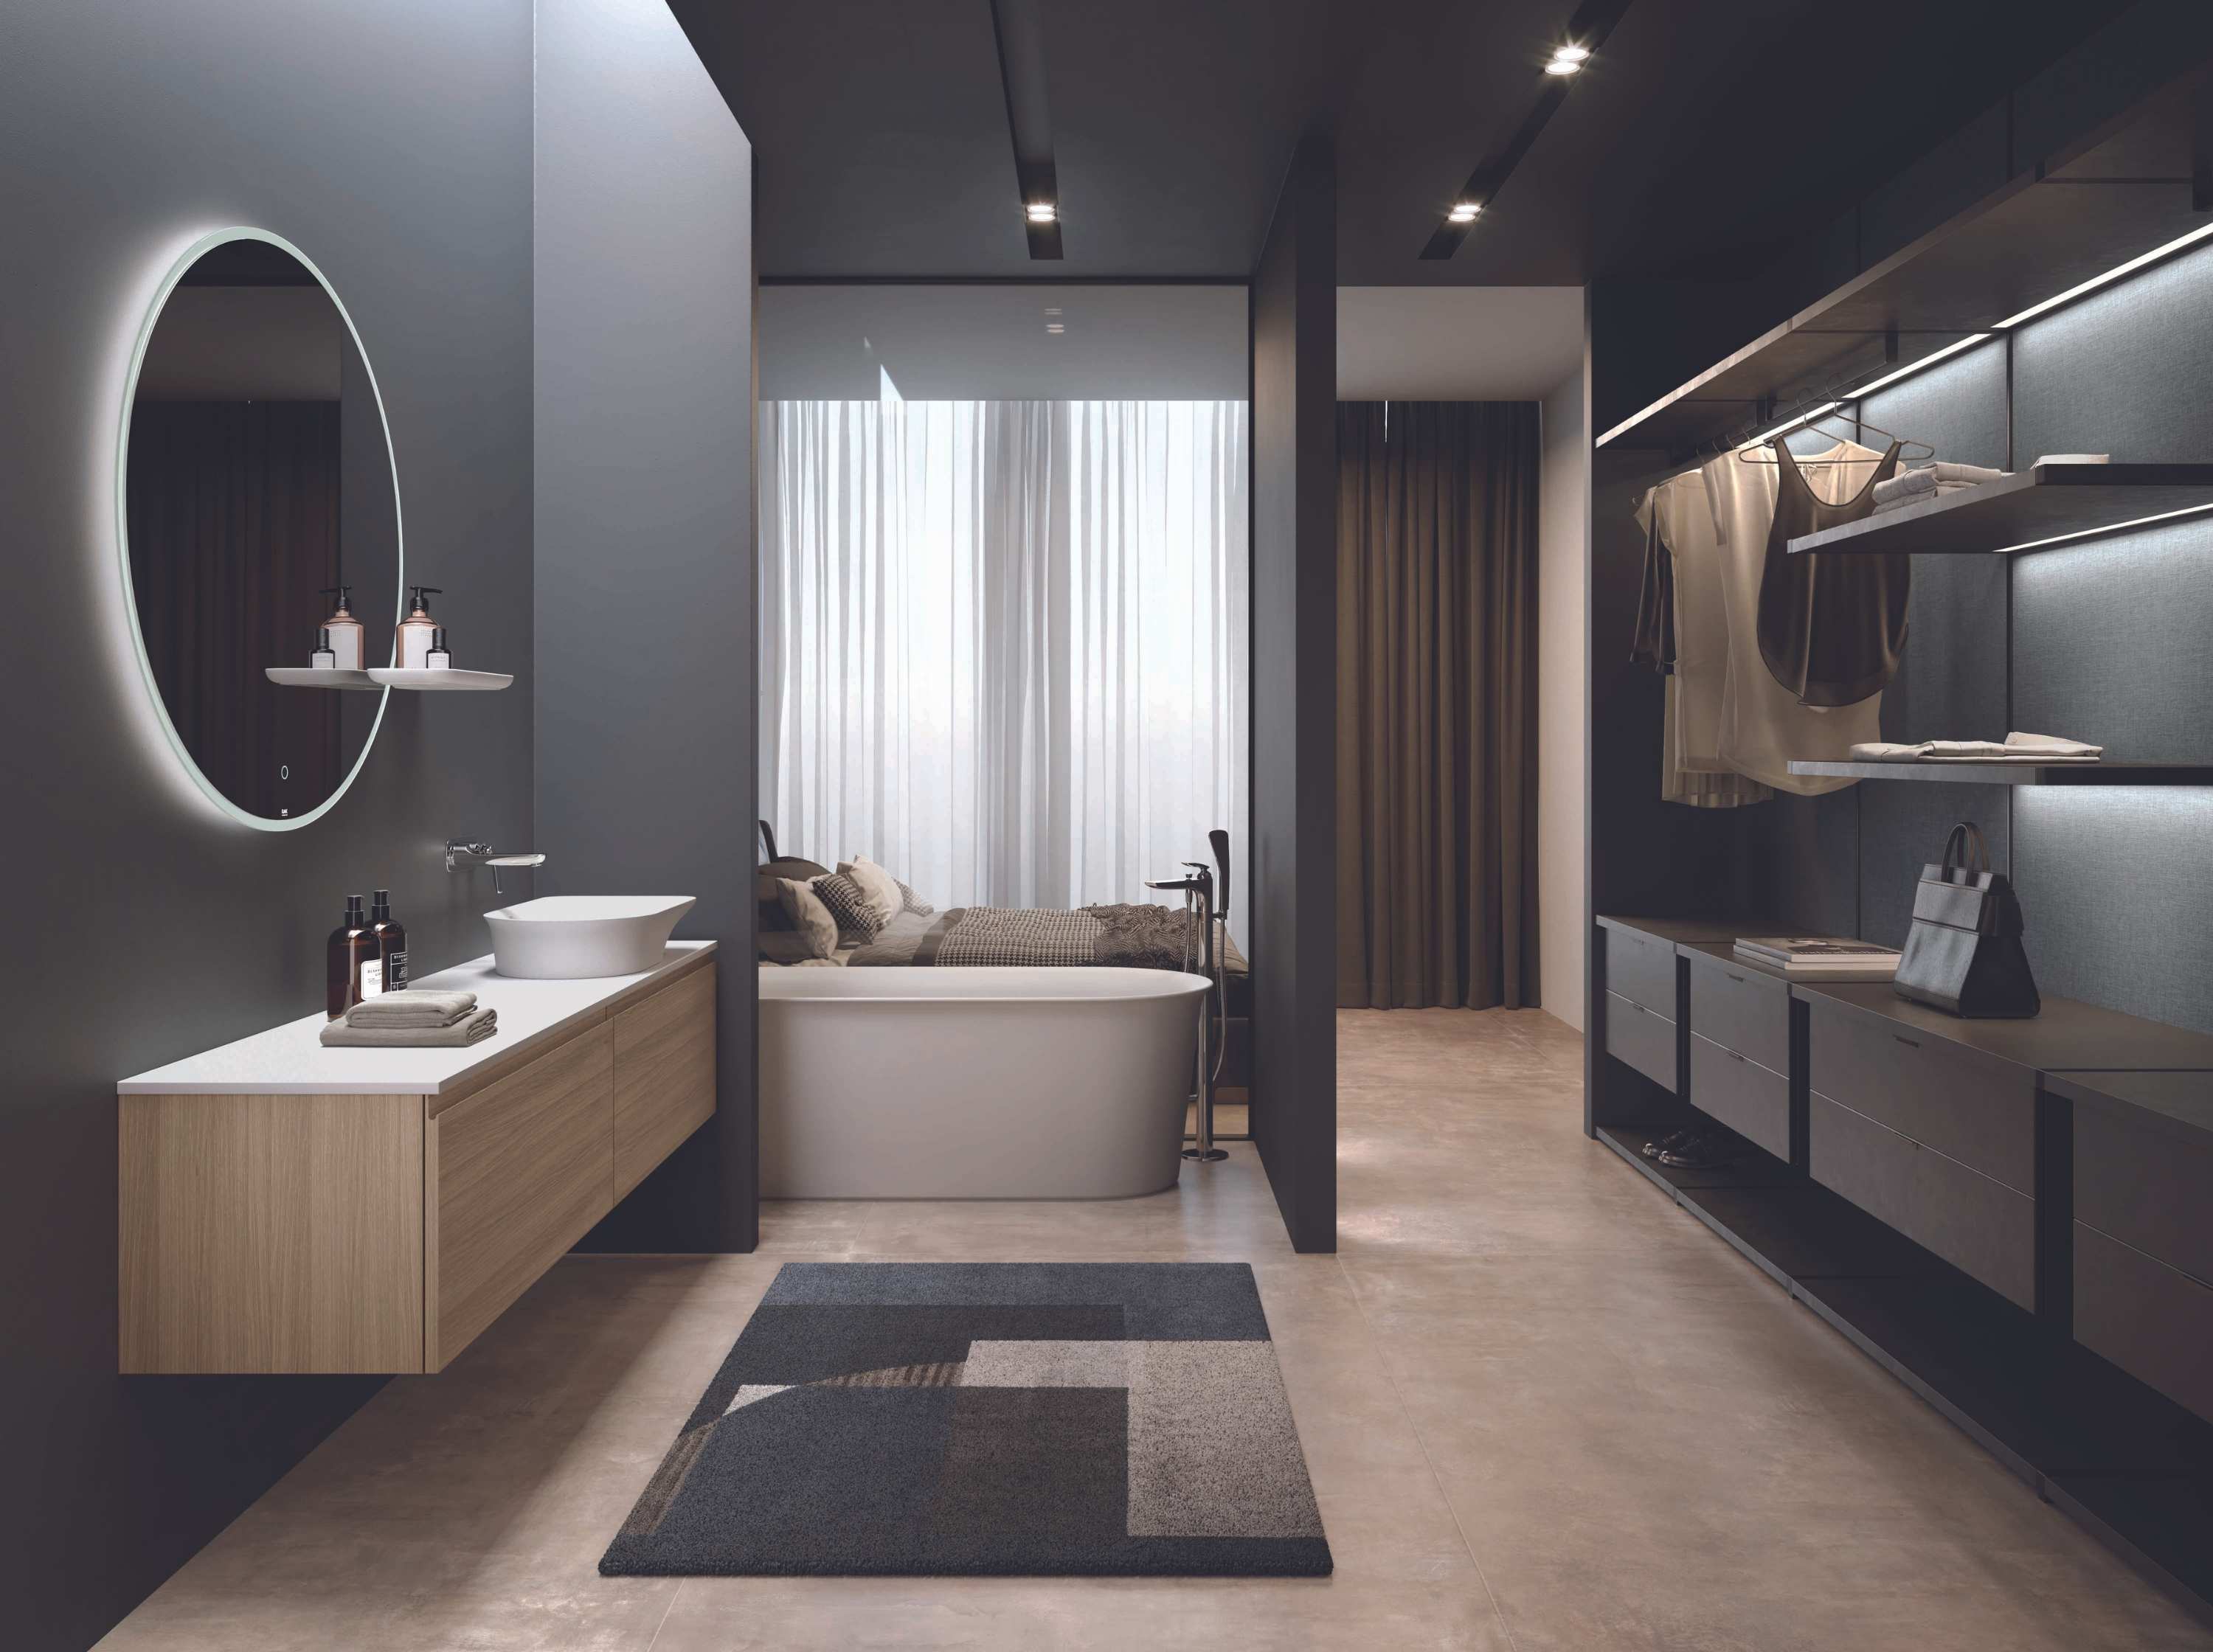 bathroom project, RAK-Valet, Emotion and Functionality Styled by Patrick Norguet